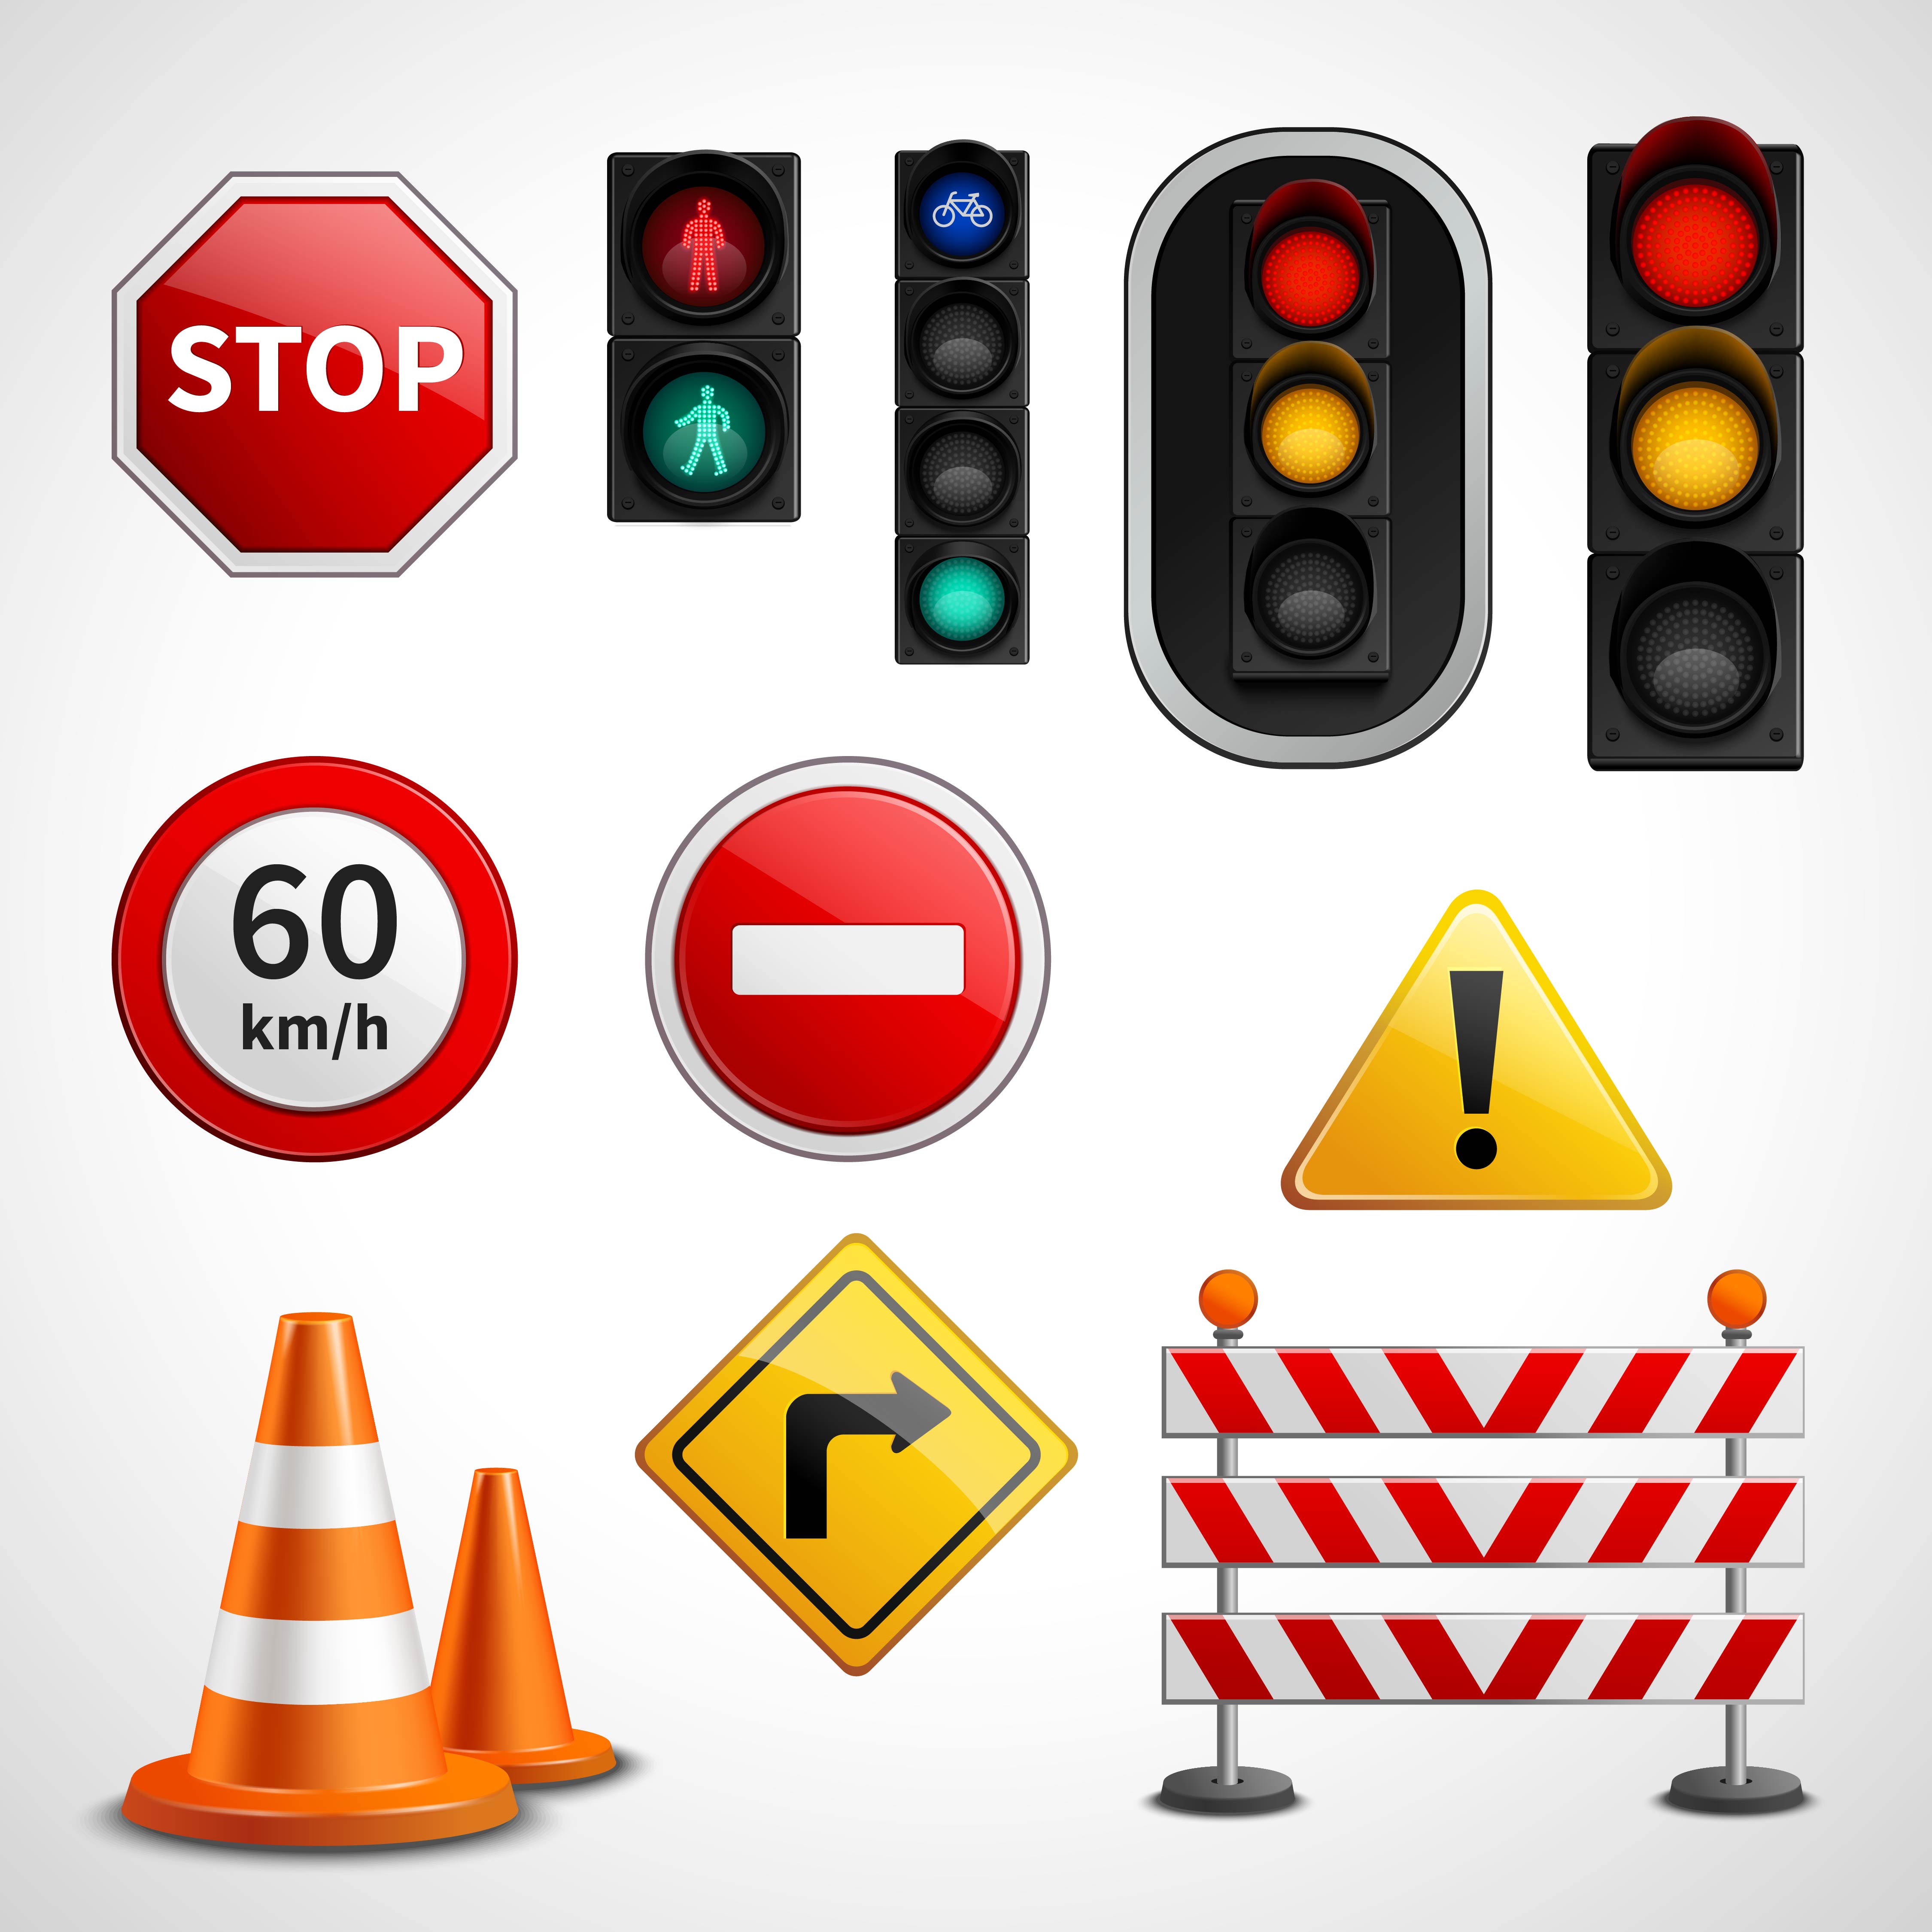 4. Pictograms of lights and traffic signs.